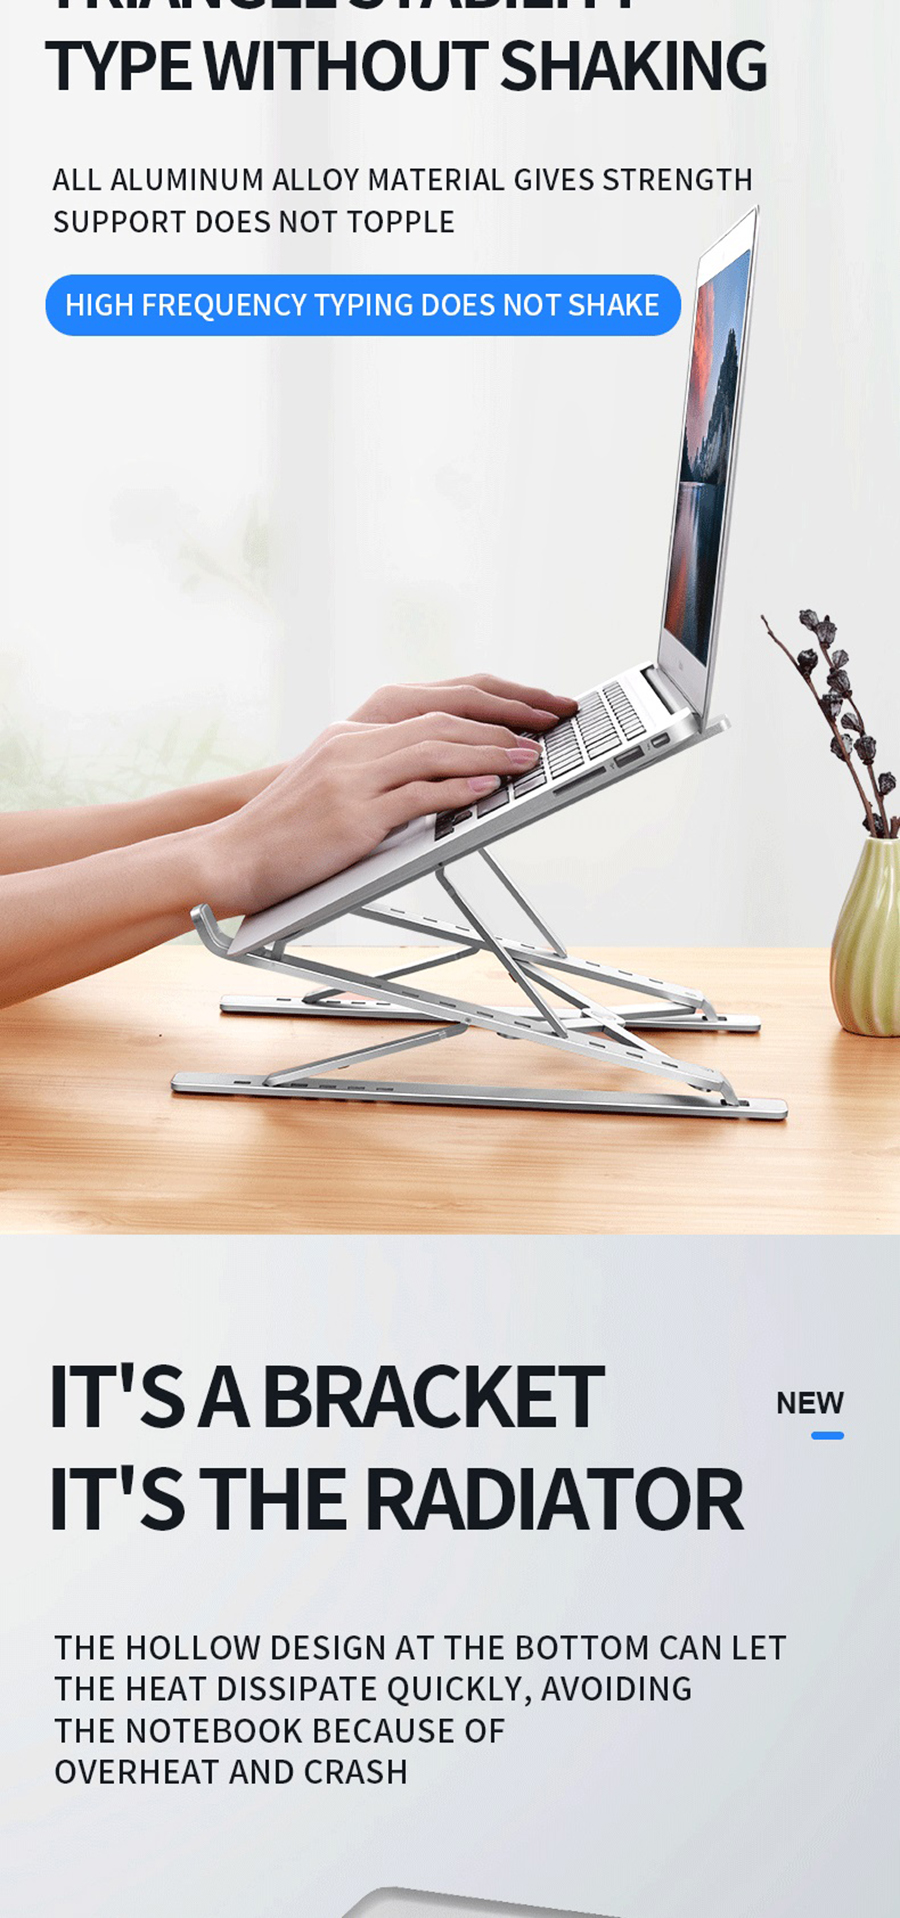 Bakeey-Foldable-Double-Layer-Multiple-Gear-Height-Adjustment-Aluminium-Alloy-Macbook-Stand-Bracket-H-1921306-6